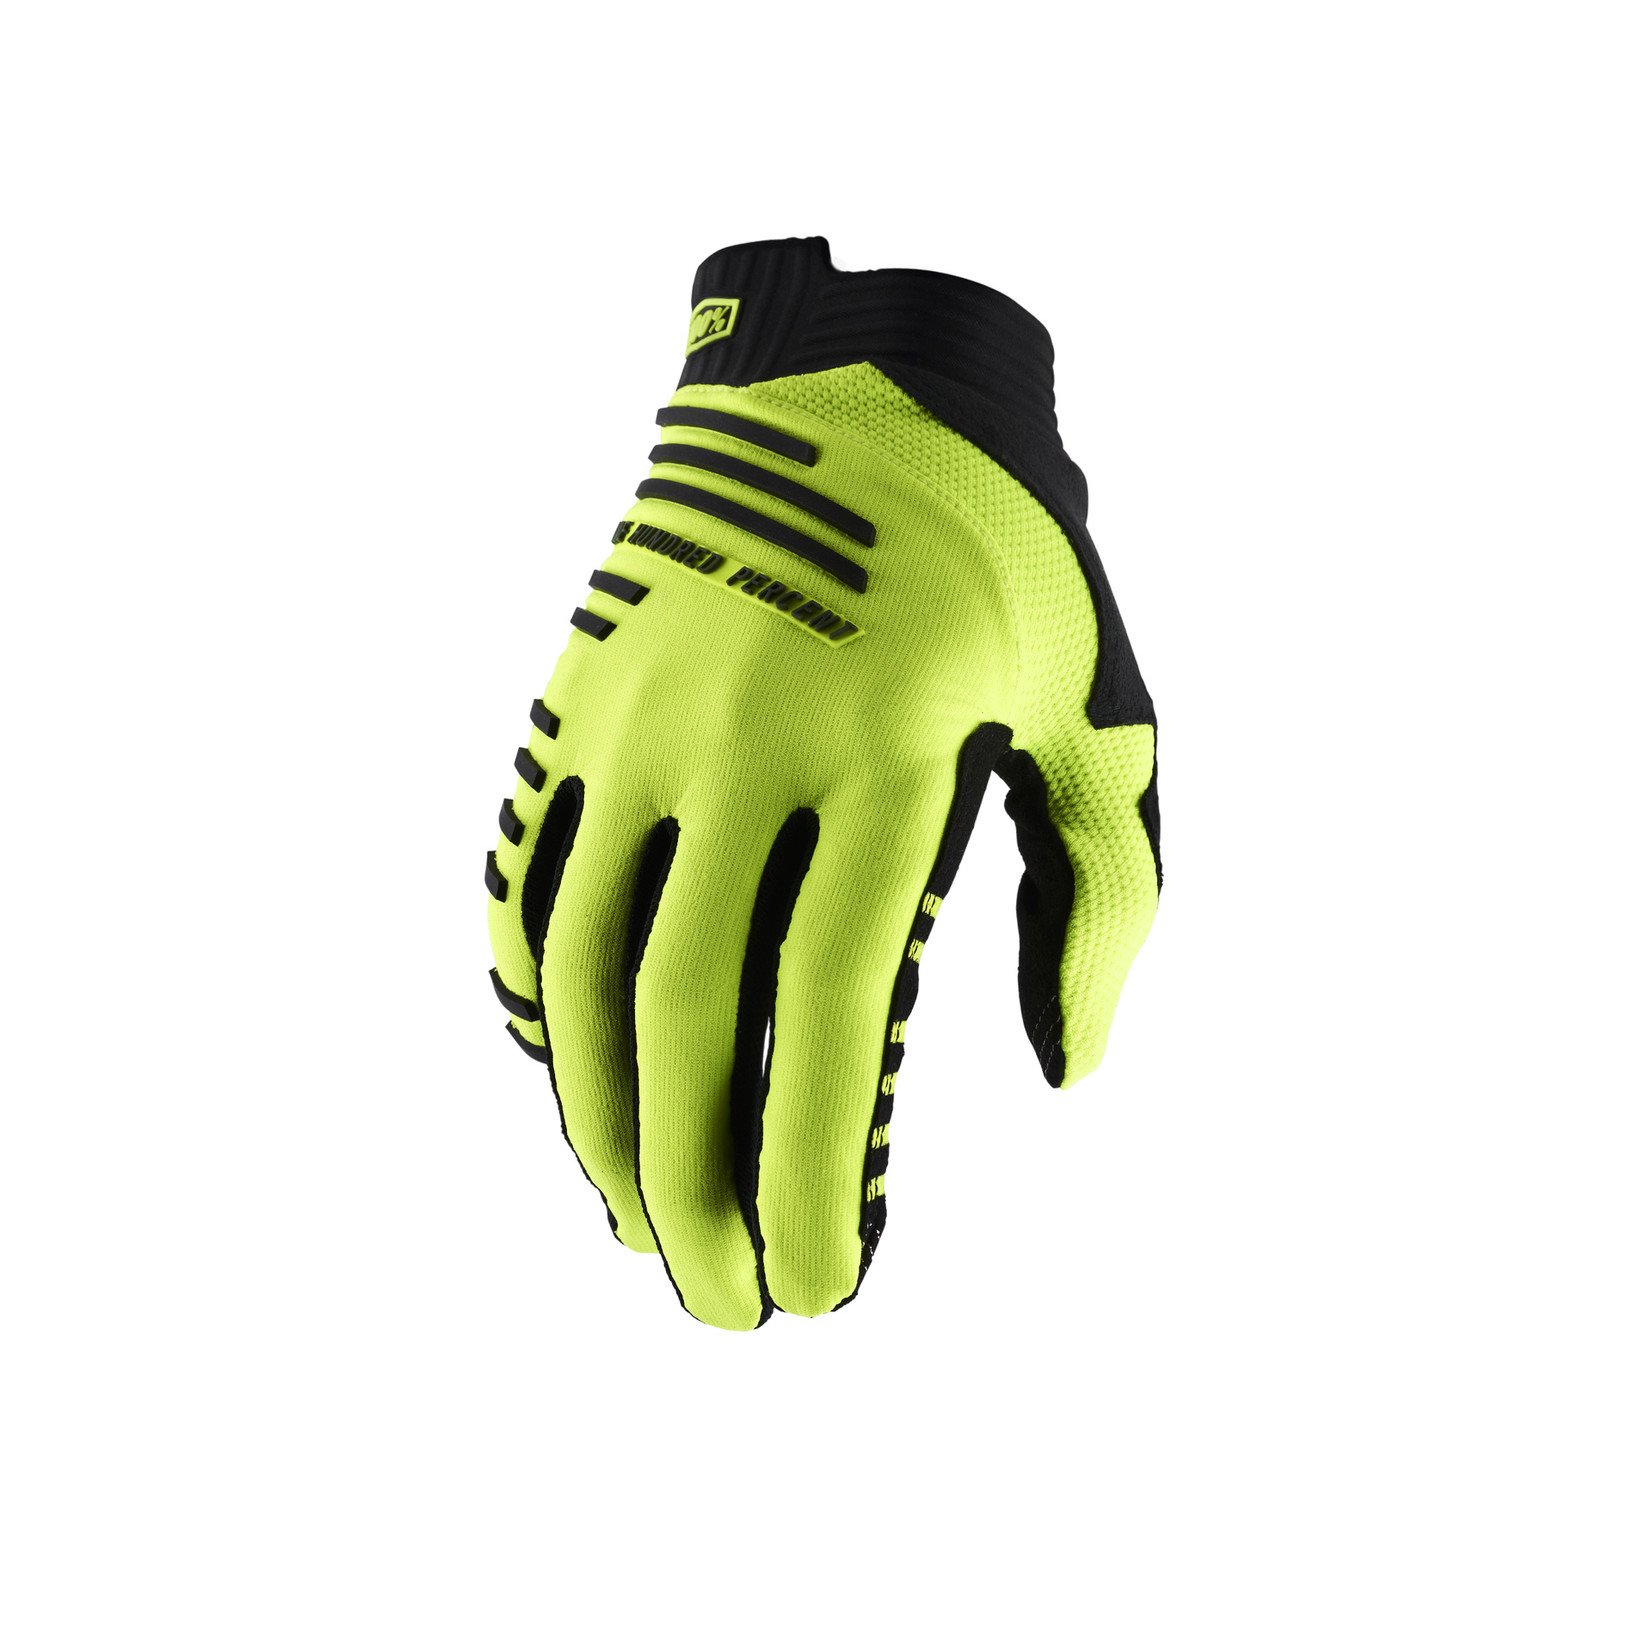 FE sports 100% R-CORE Cycling Gloves - Fluo Yellow